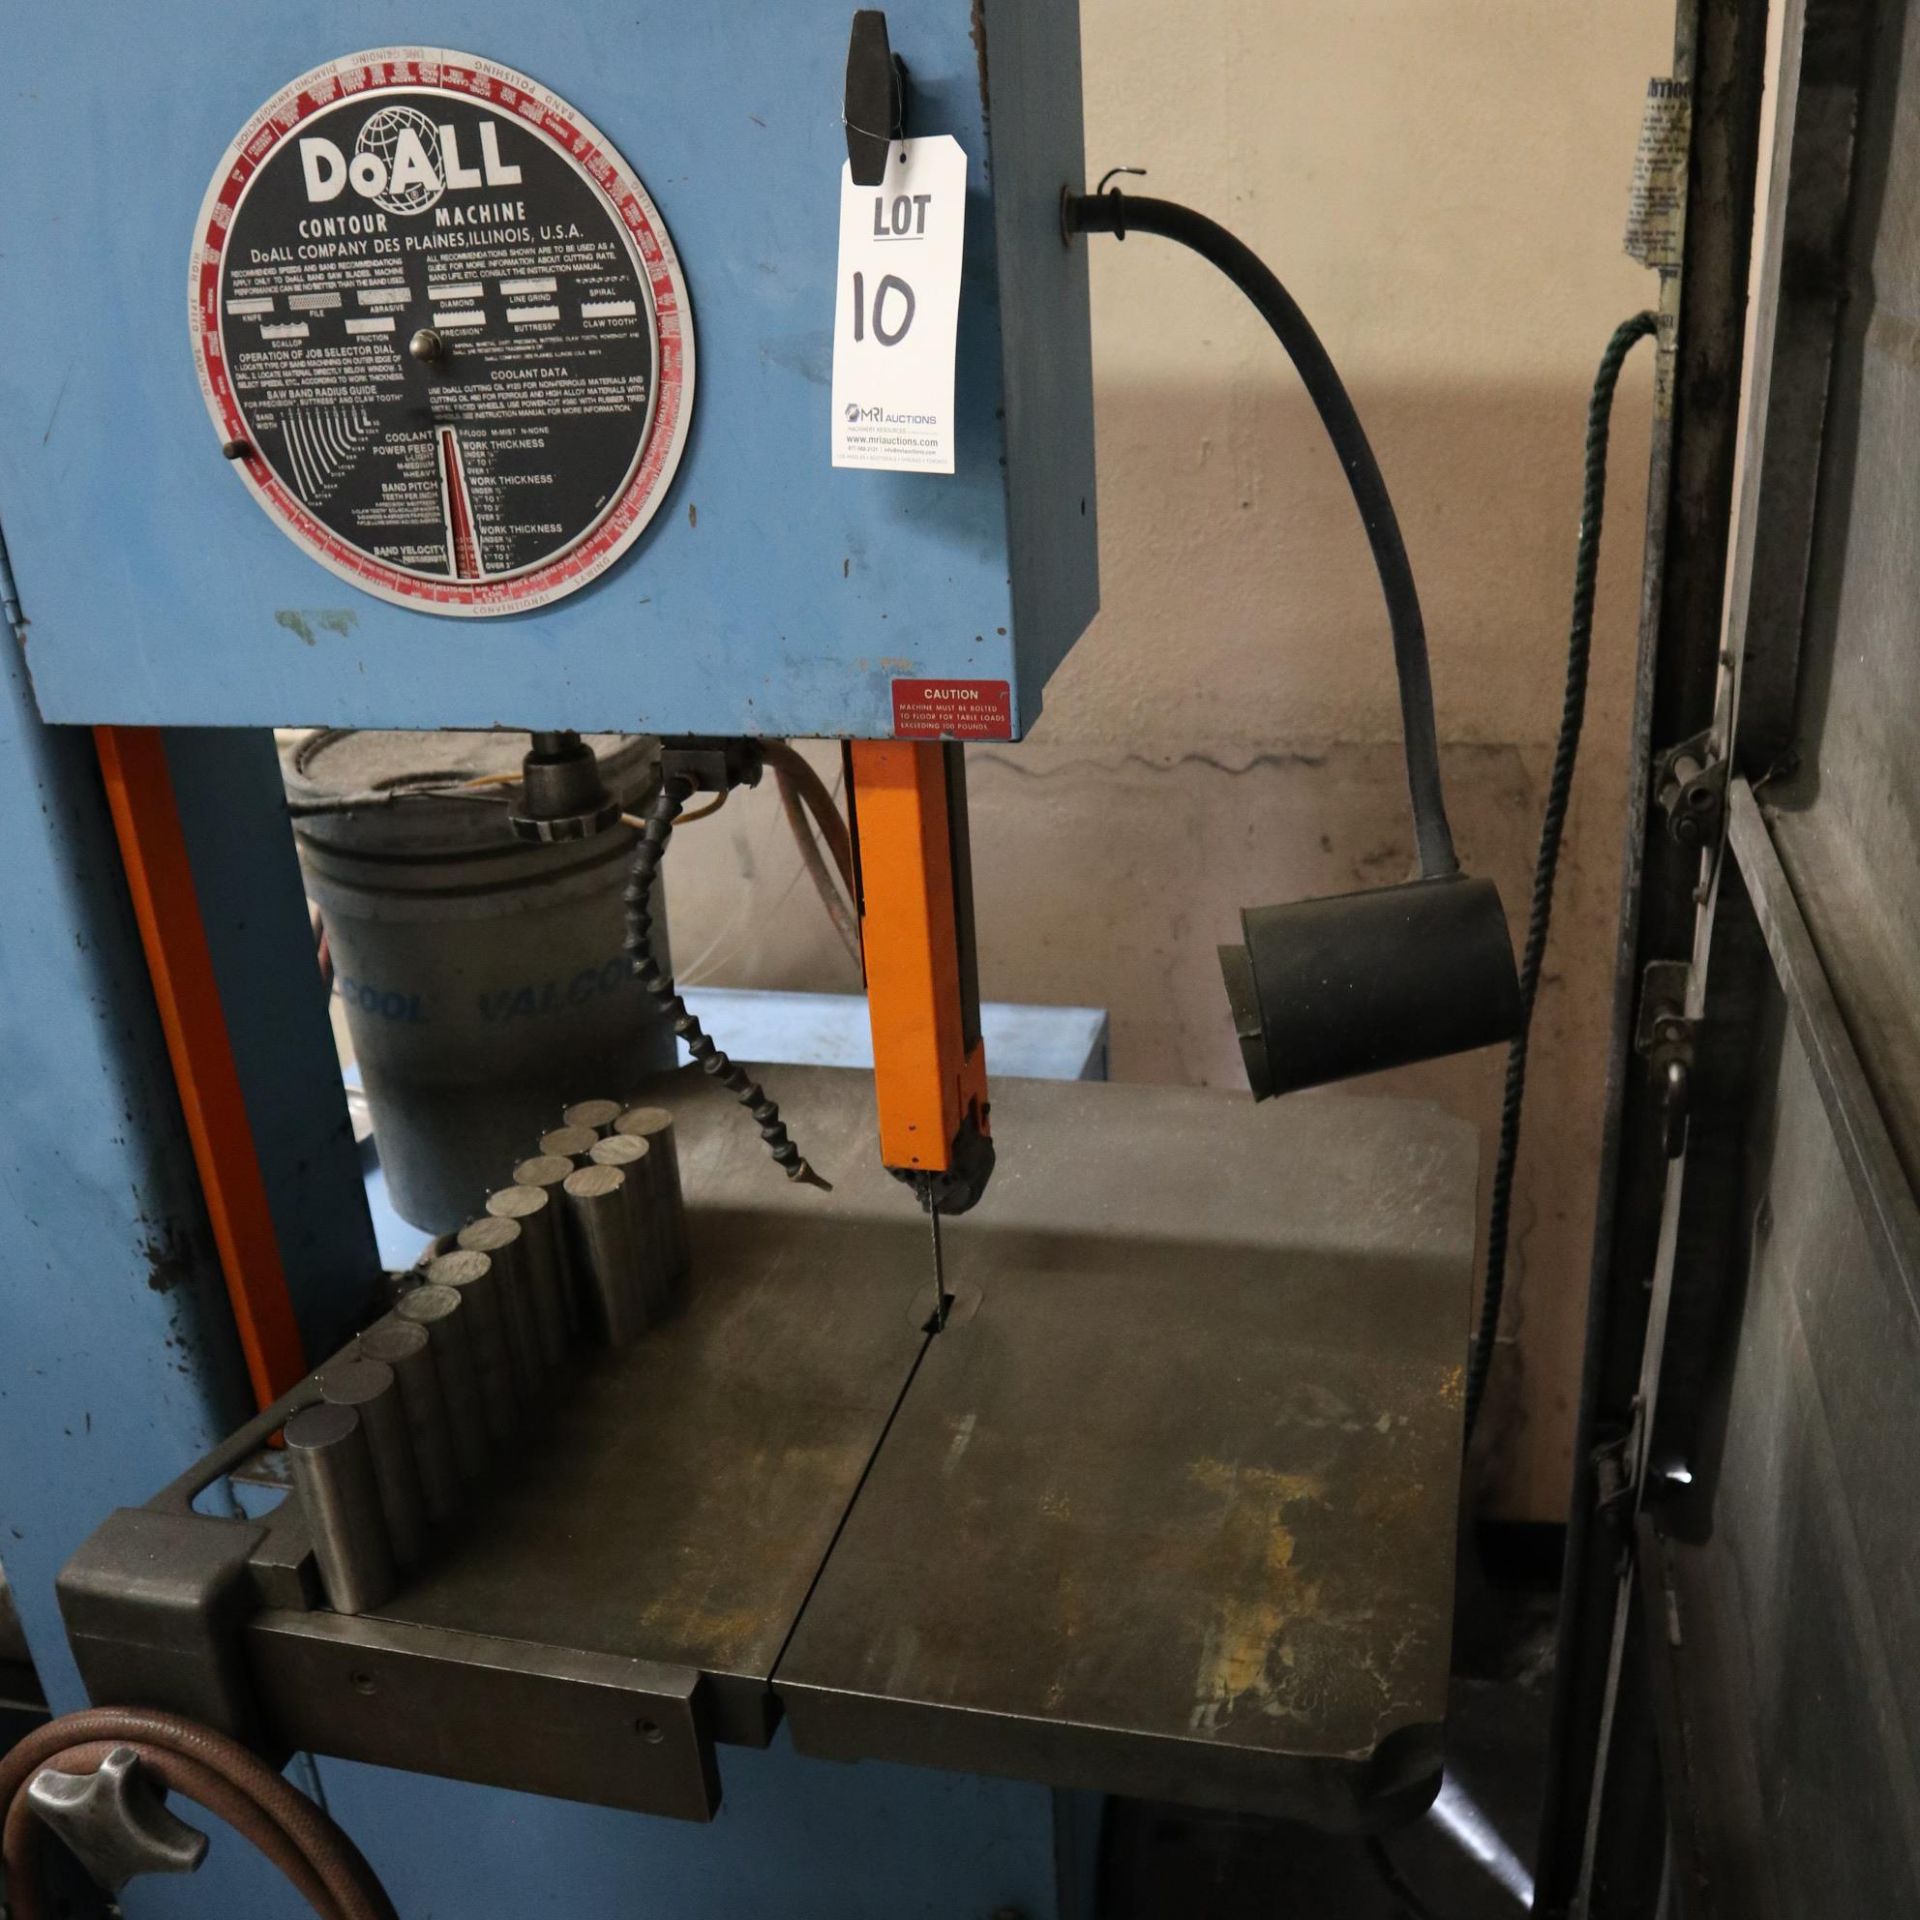 DOALL 2013-V VERTICAL METALWORKING BANDSAW, S/N 500-961078 *MATERIAL IN PHOTO NOT INCLUDED* - Image 2 of 4